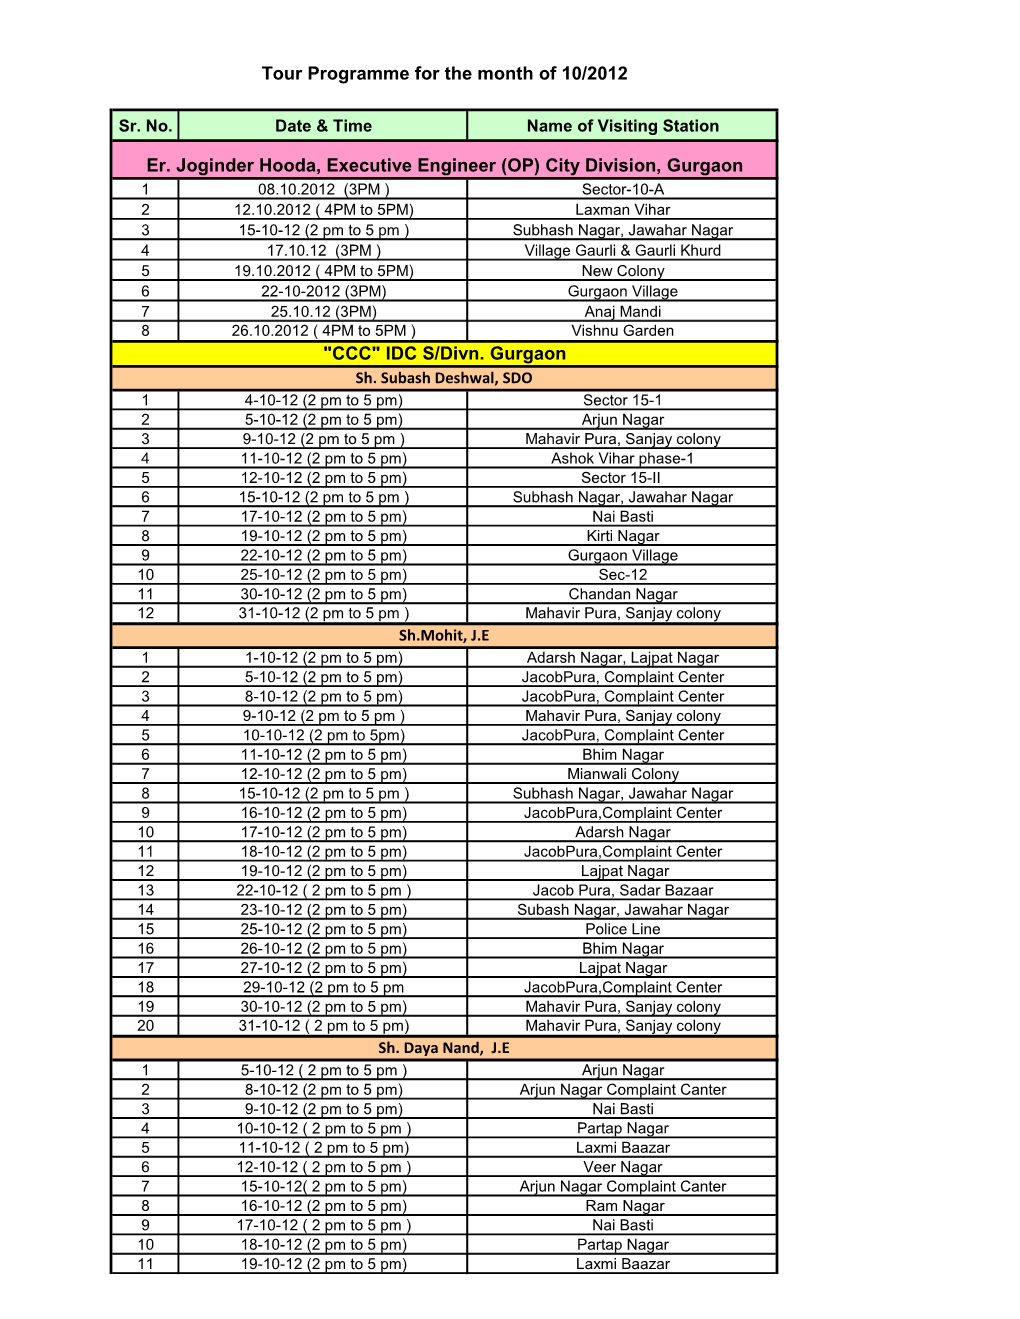 (OP) City Division, Gurgaon Tour Programme for the Month of 10/2012